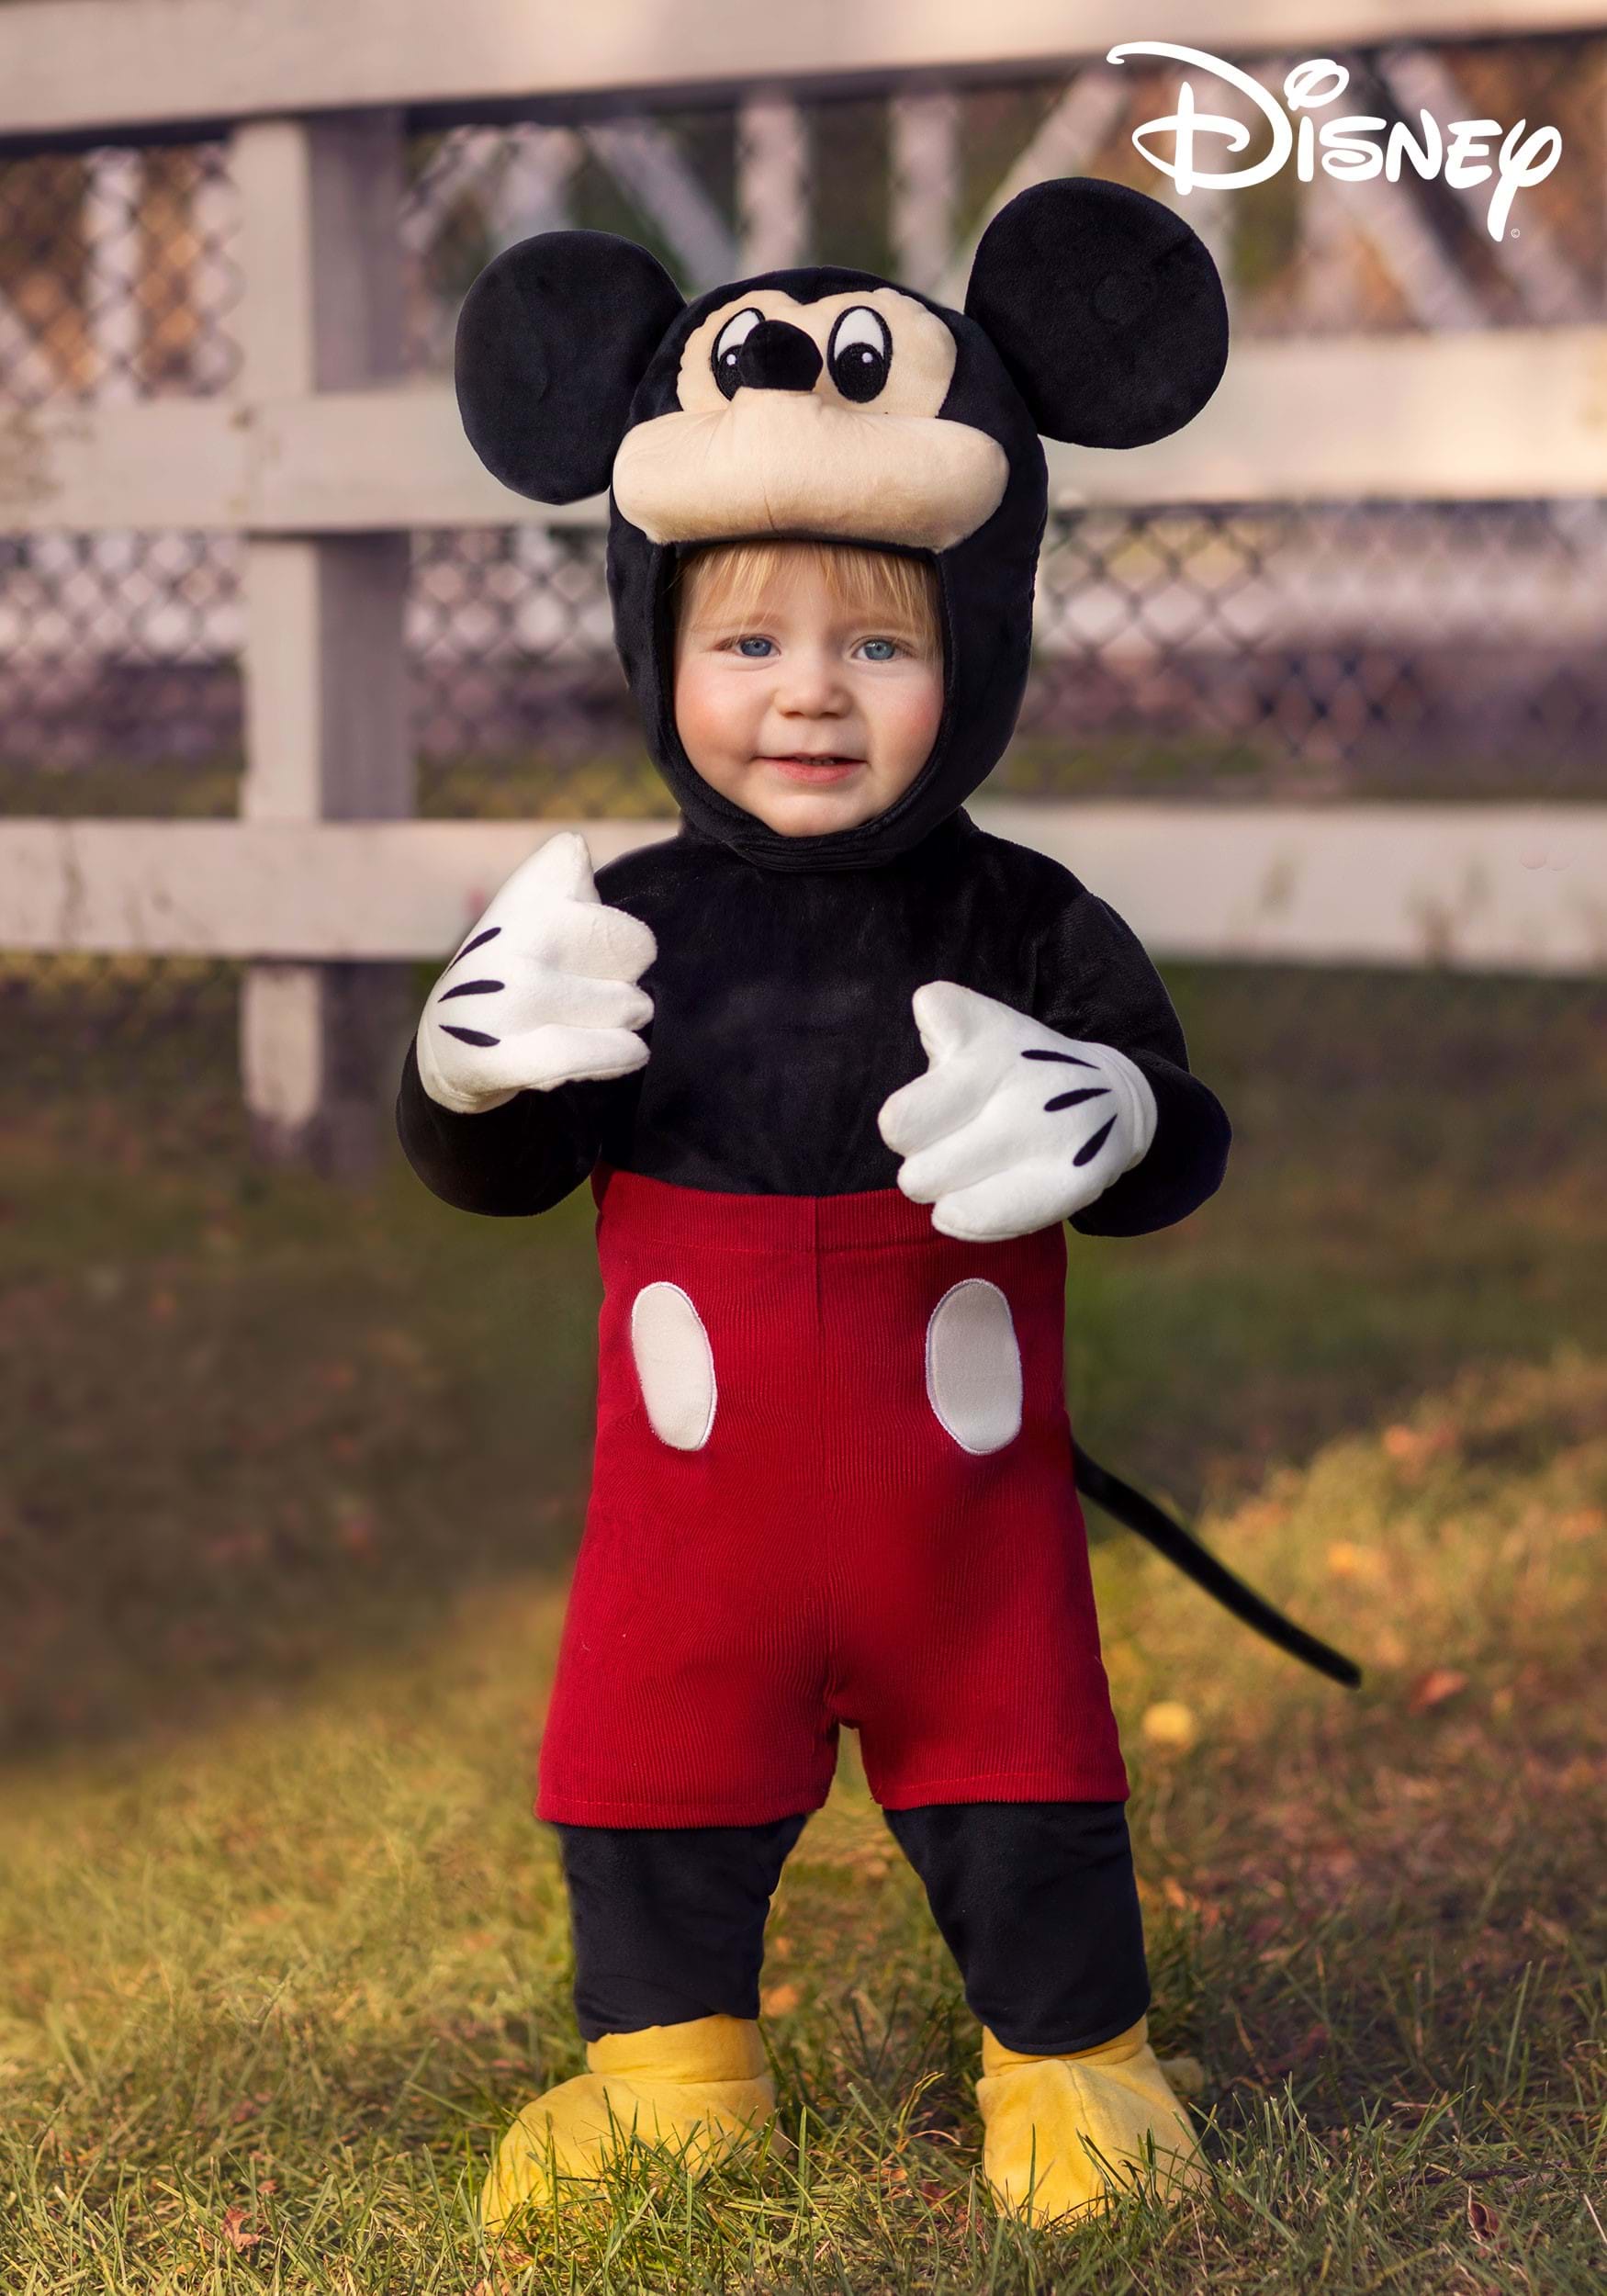 https://images.halloweencostumes.com/products/75335/1-1/infant-snuggly-mickey-mouse-costume.jpg